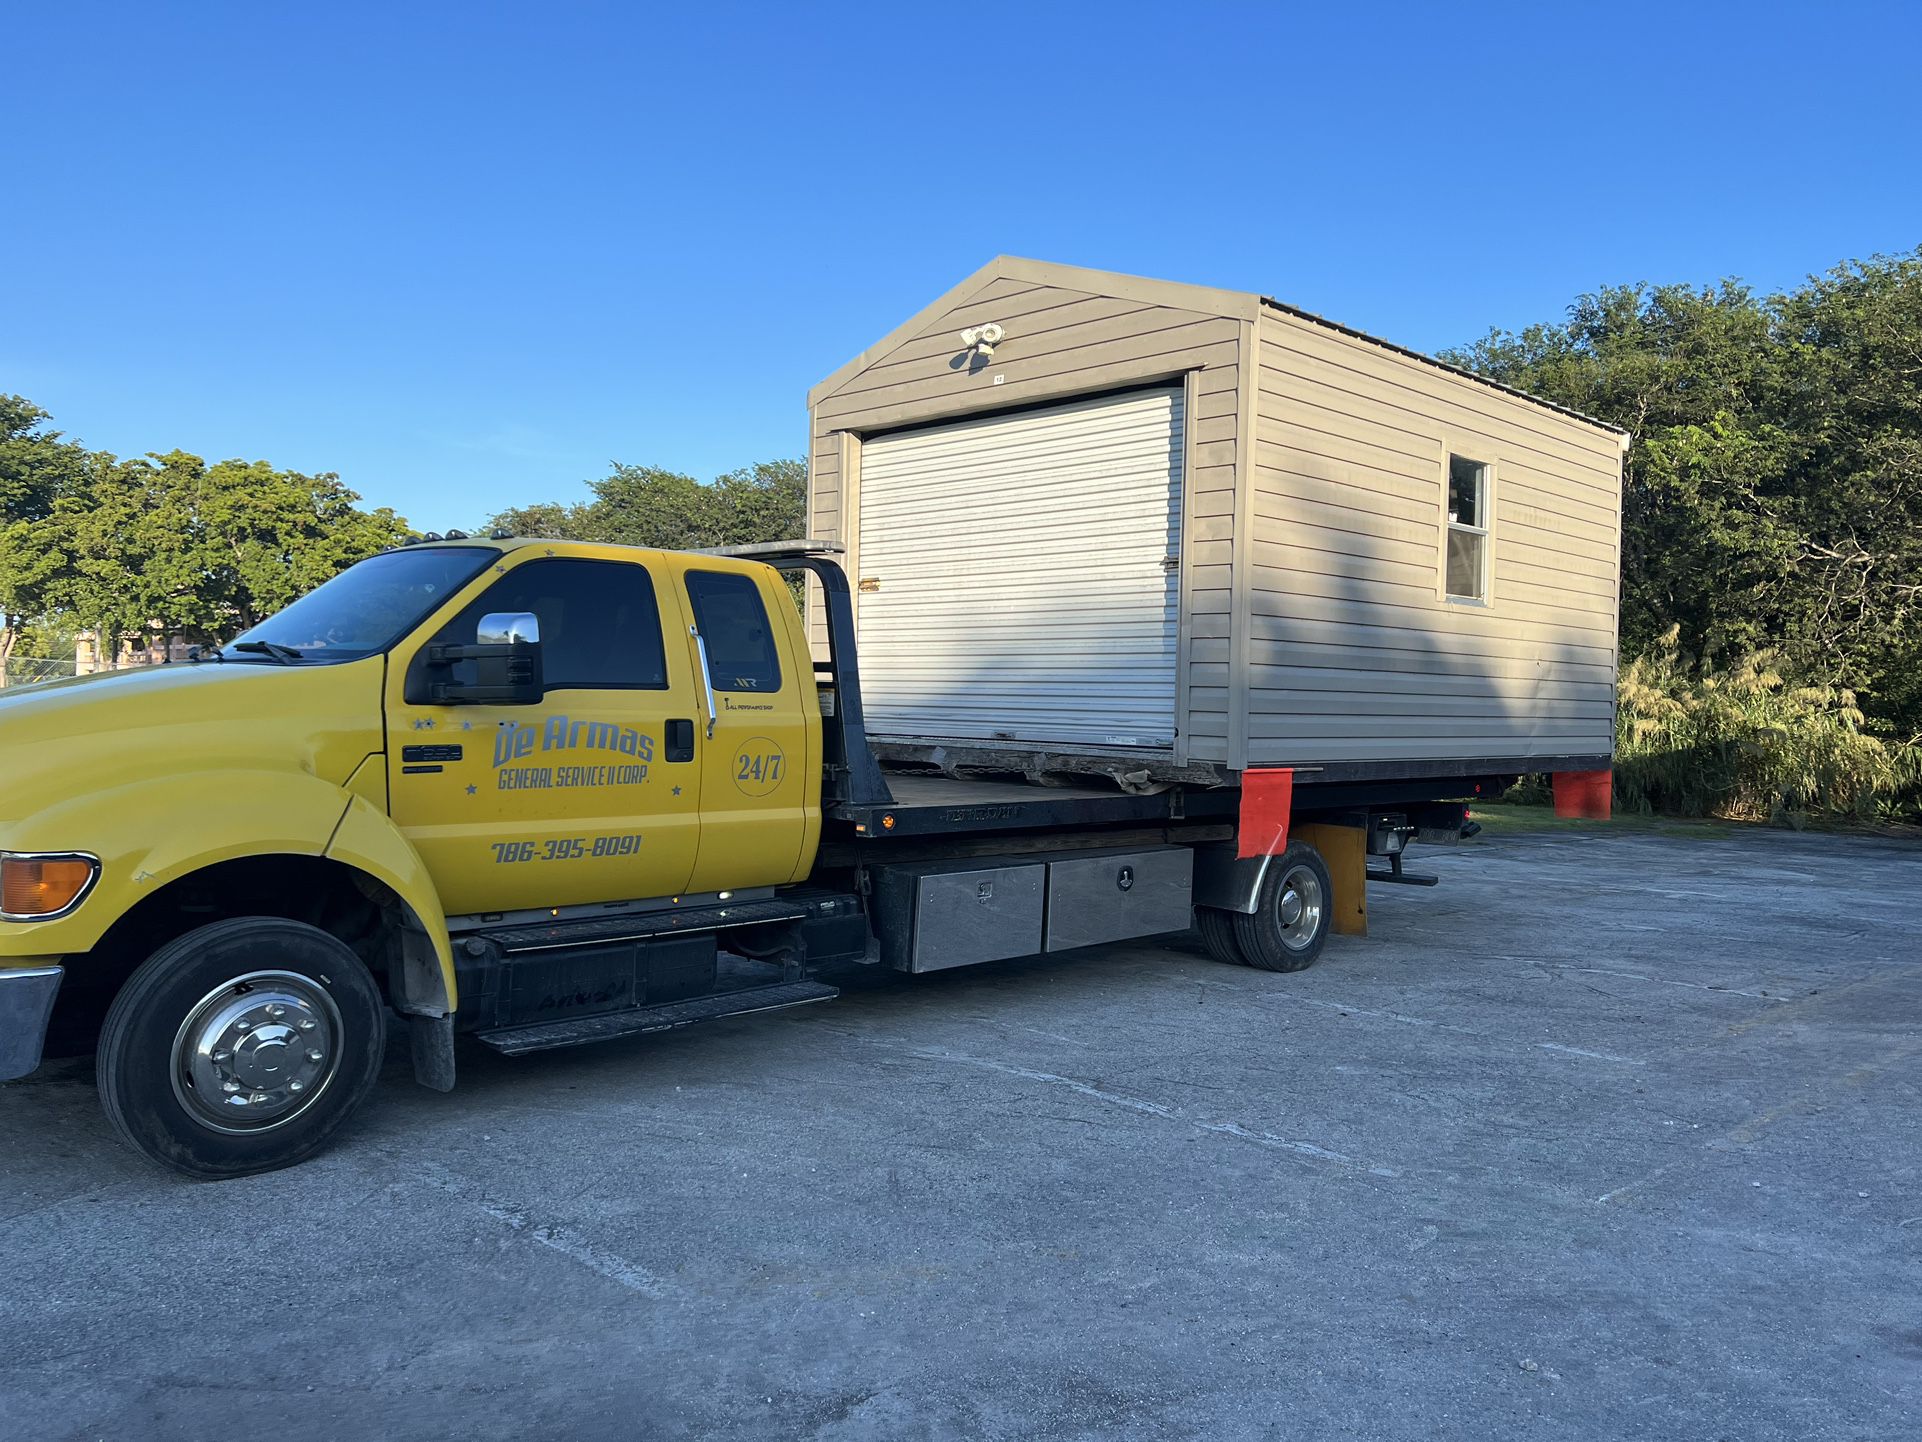 Sheds Muving To Relocating All Florida Casita De Patios Storage Space 